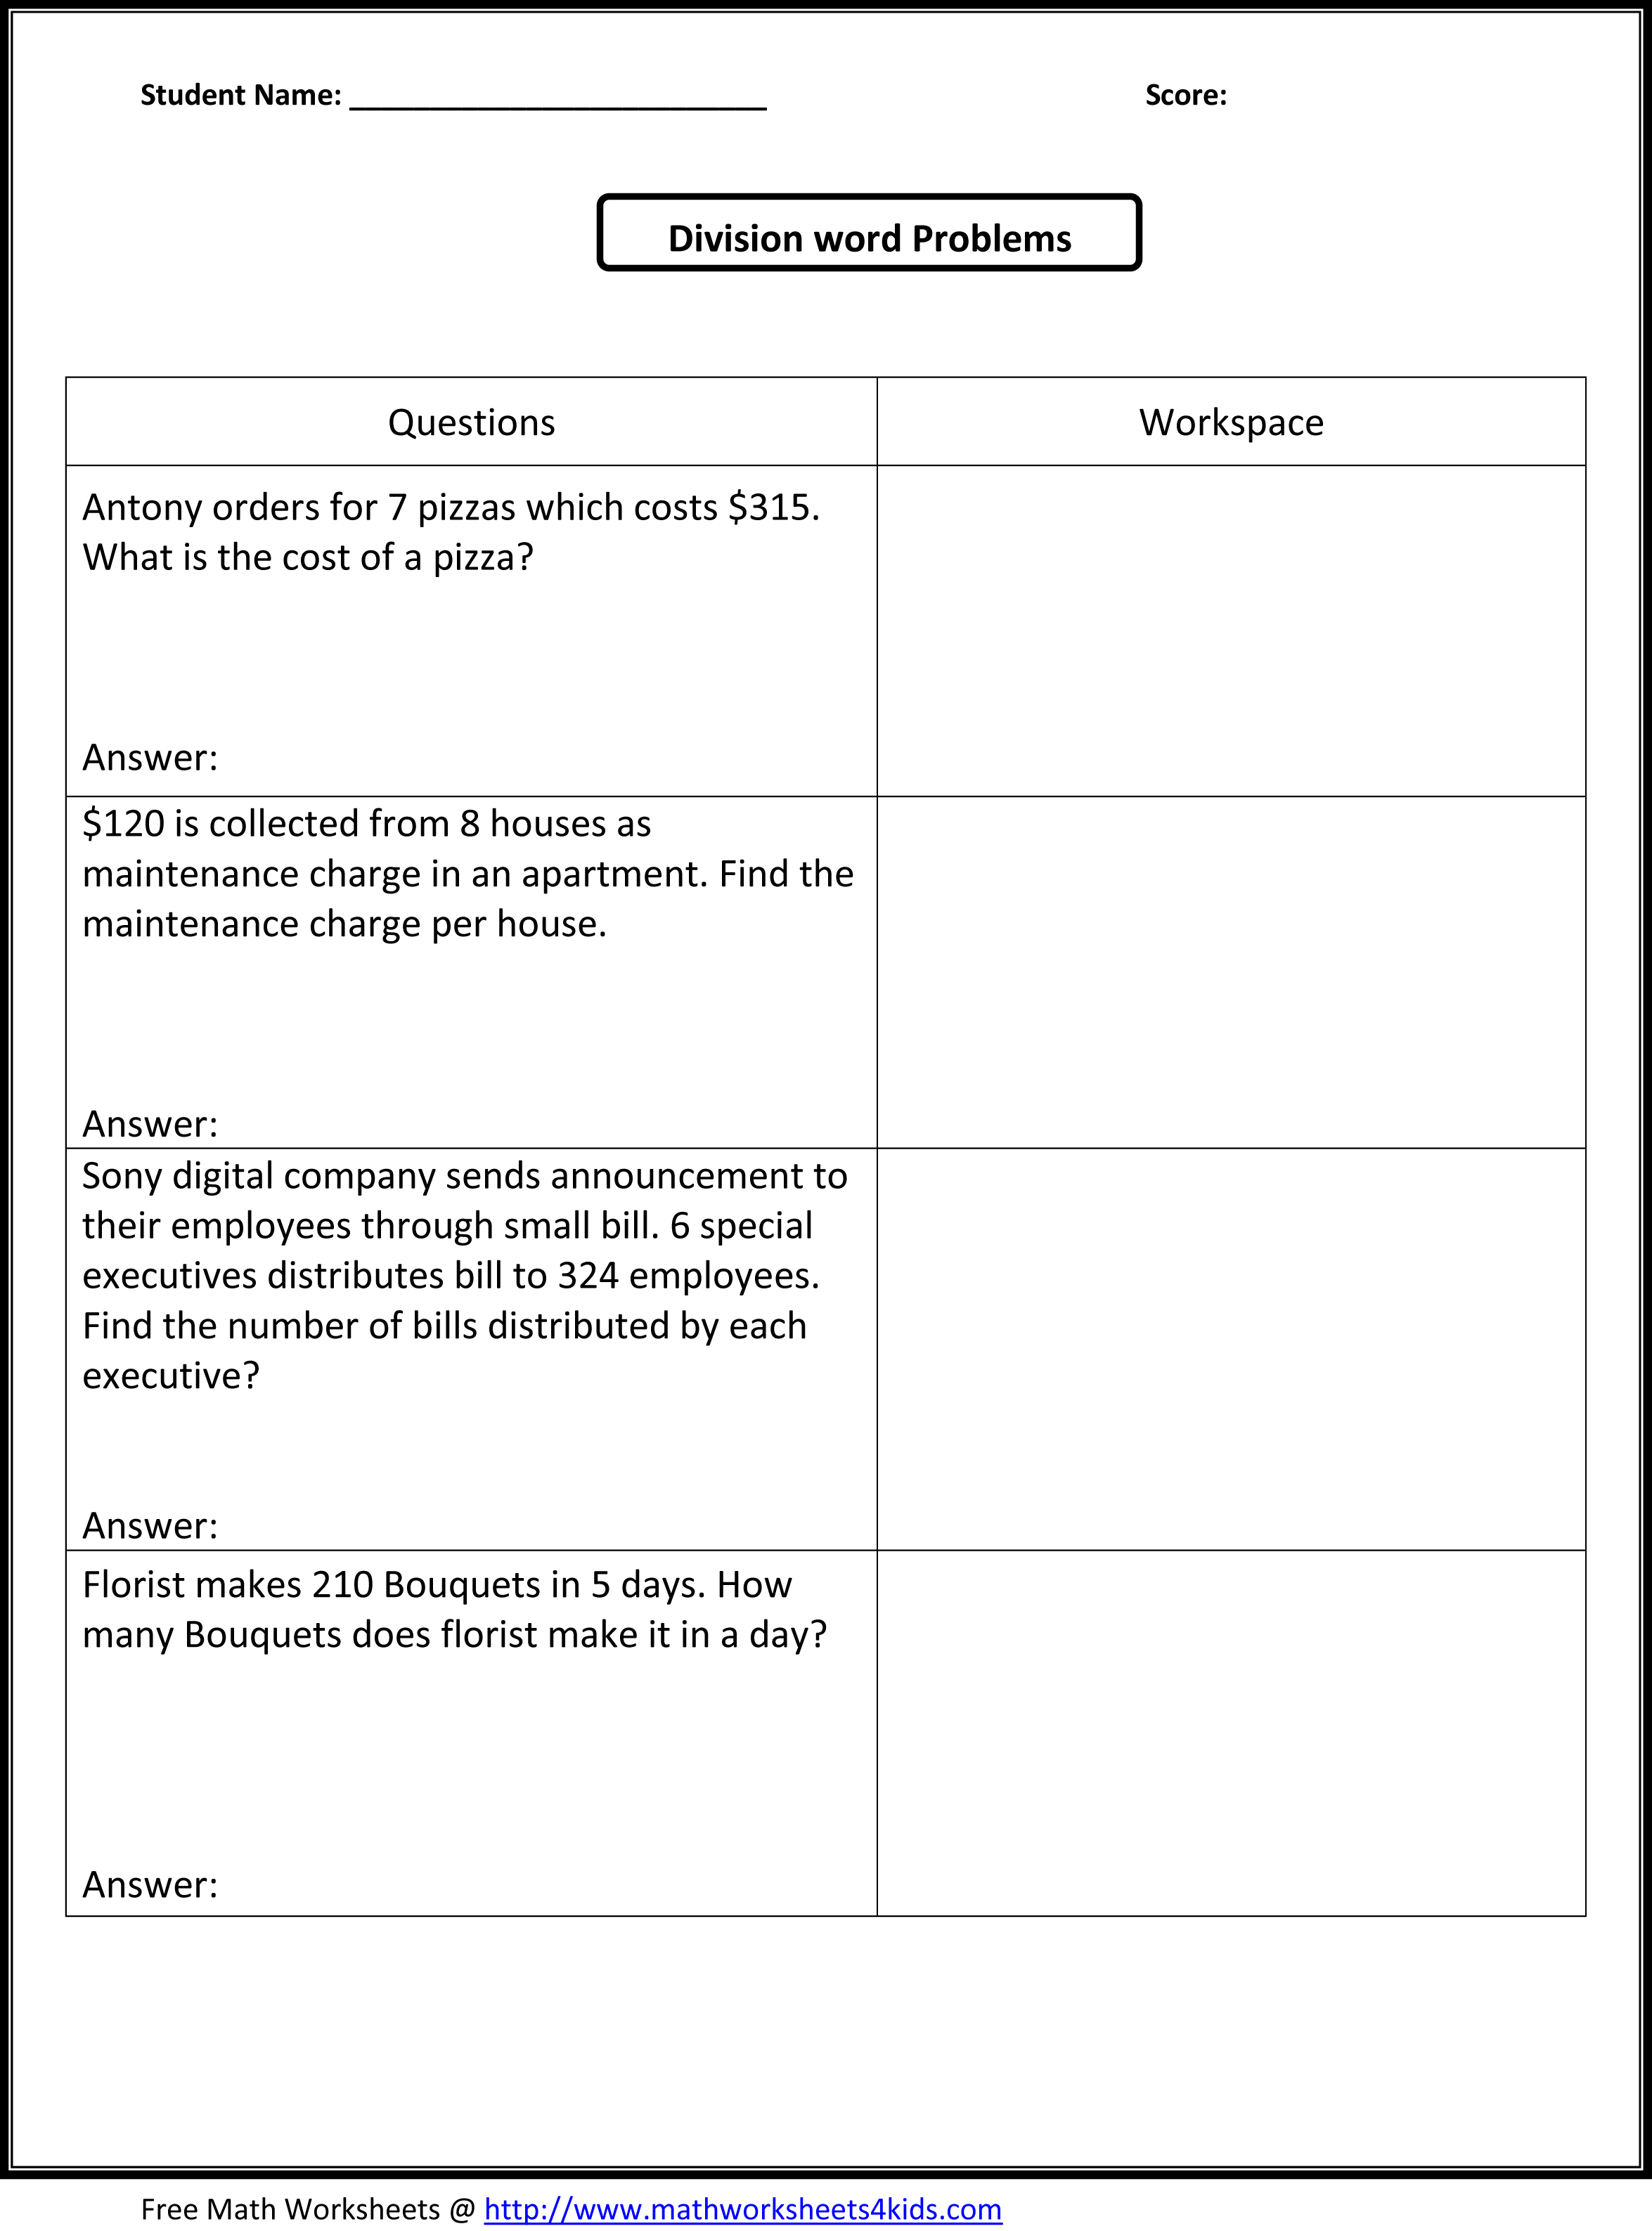 12 Best Images Of 4th Grade Division Worksheets With Answers 5th Grade Math Word Problems